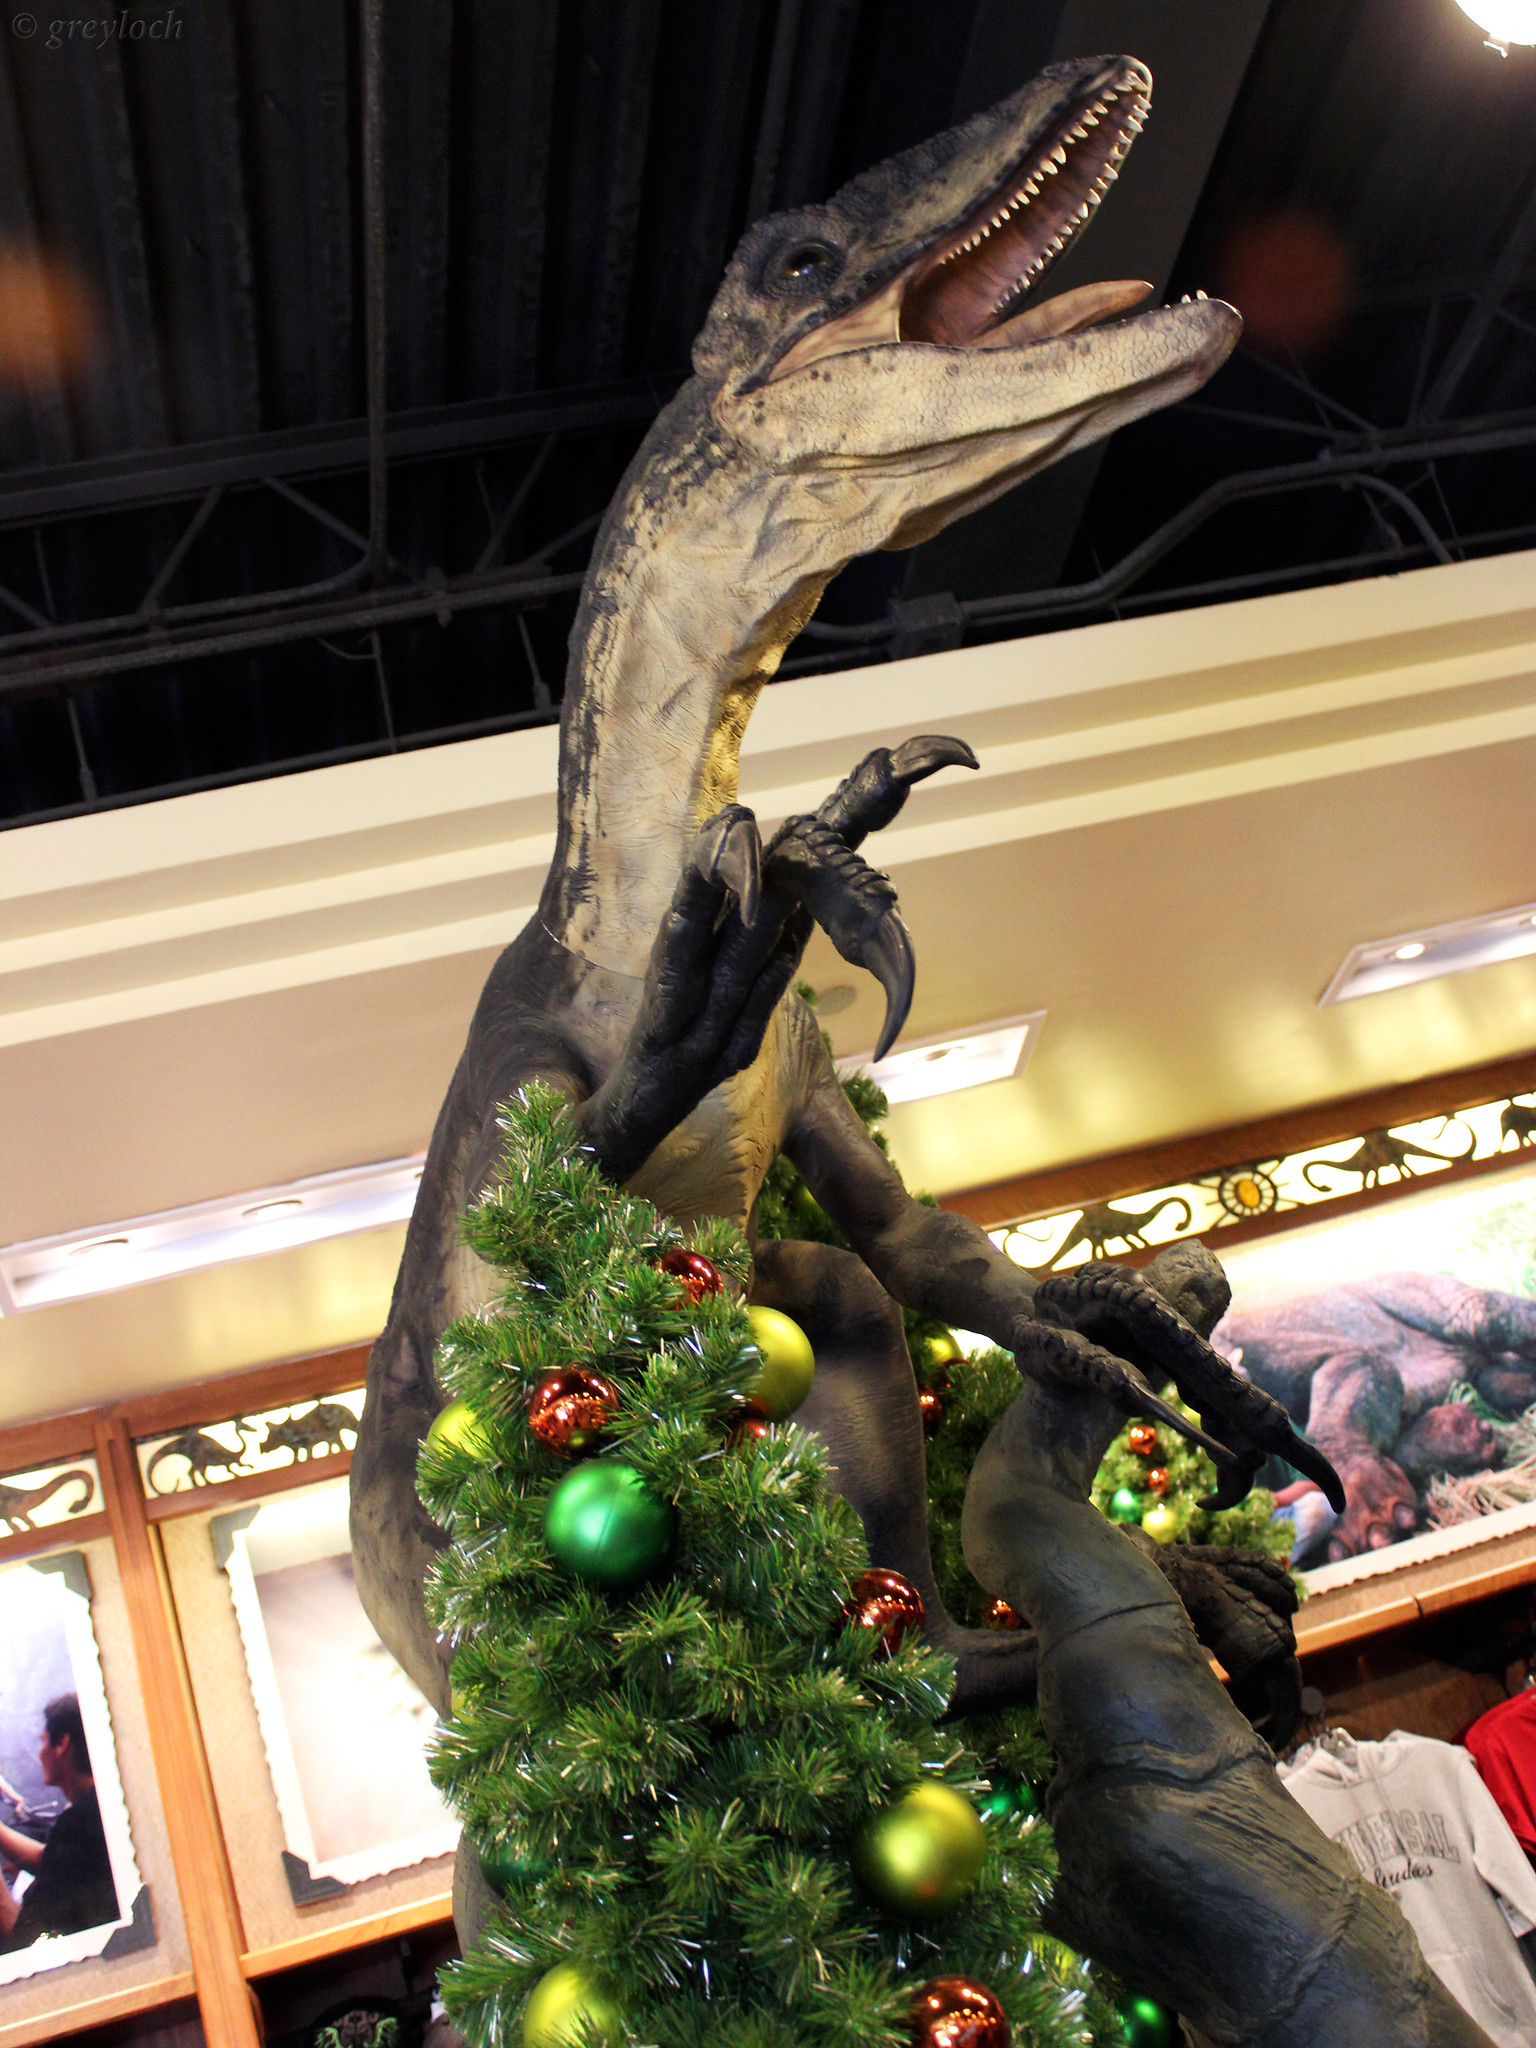 A velociraptor in a Christmas tree